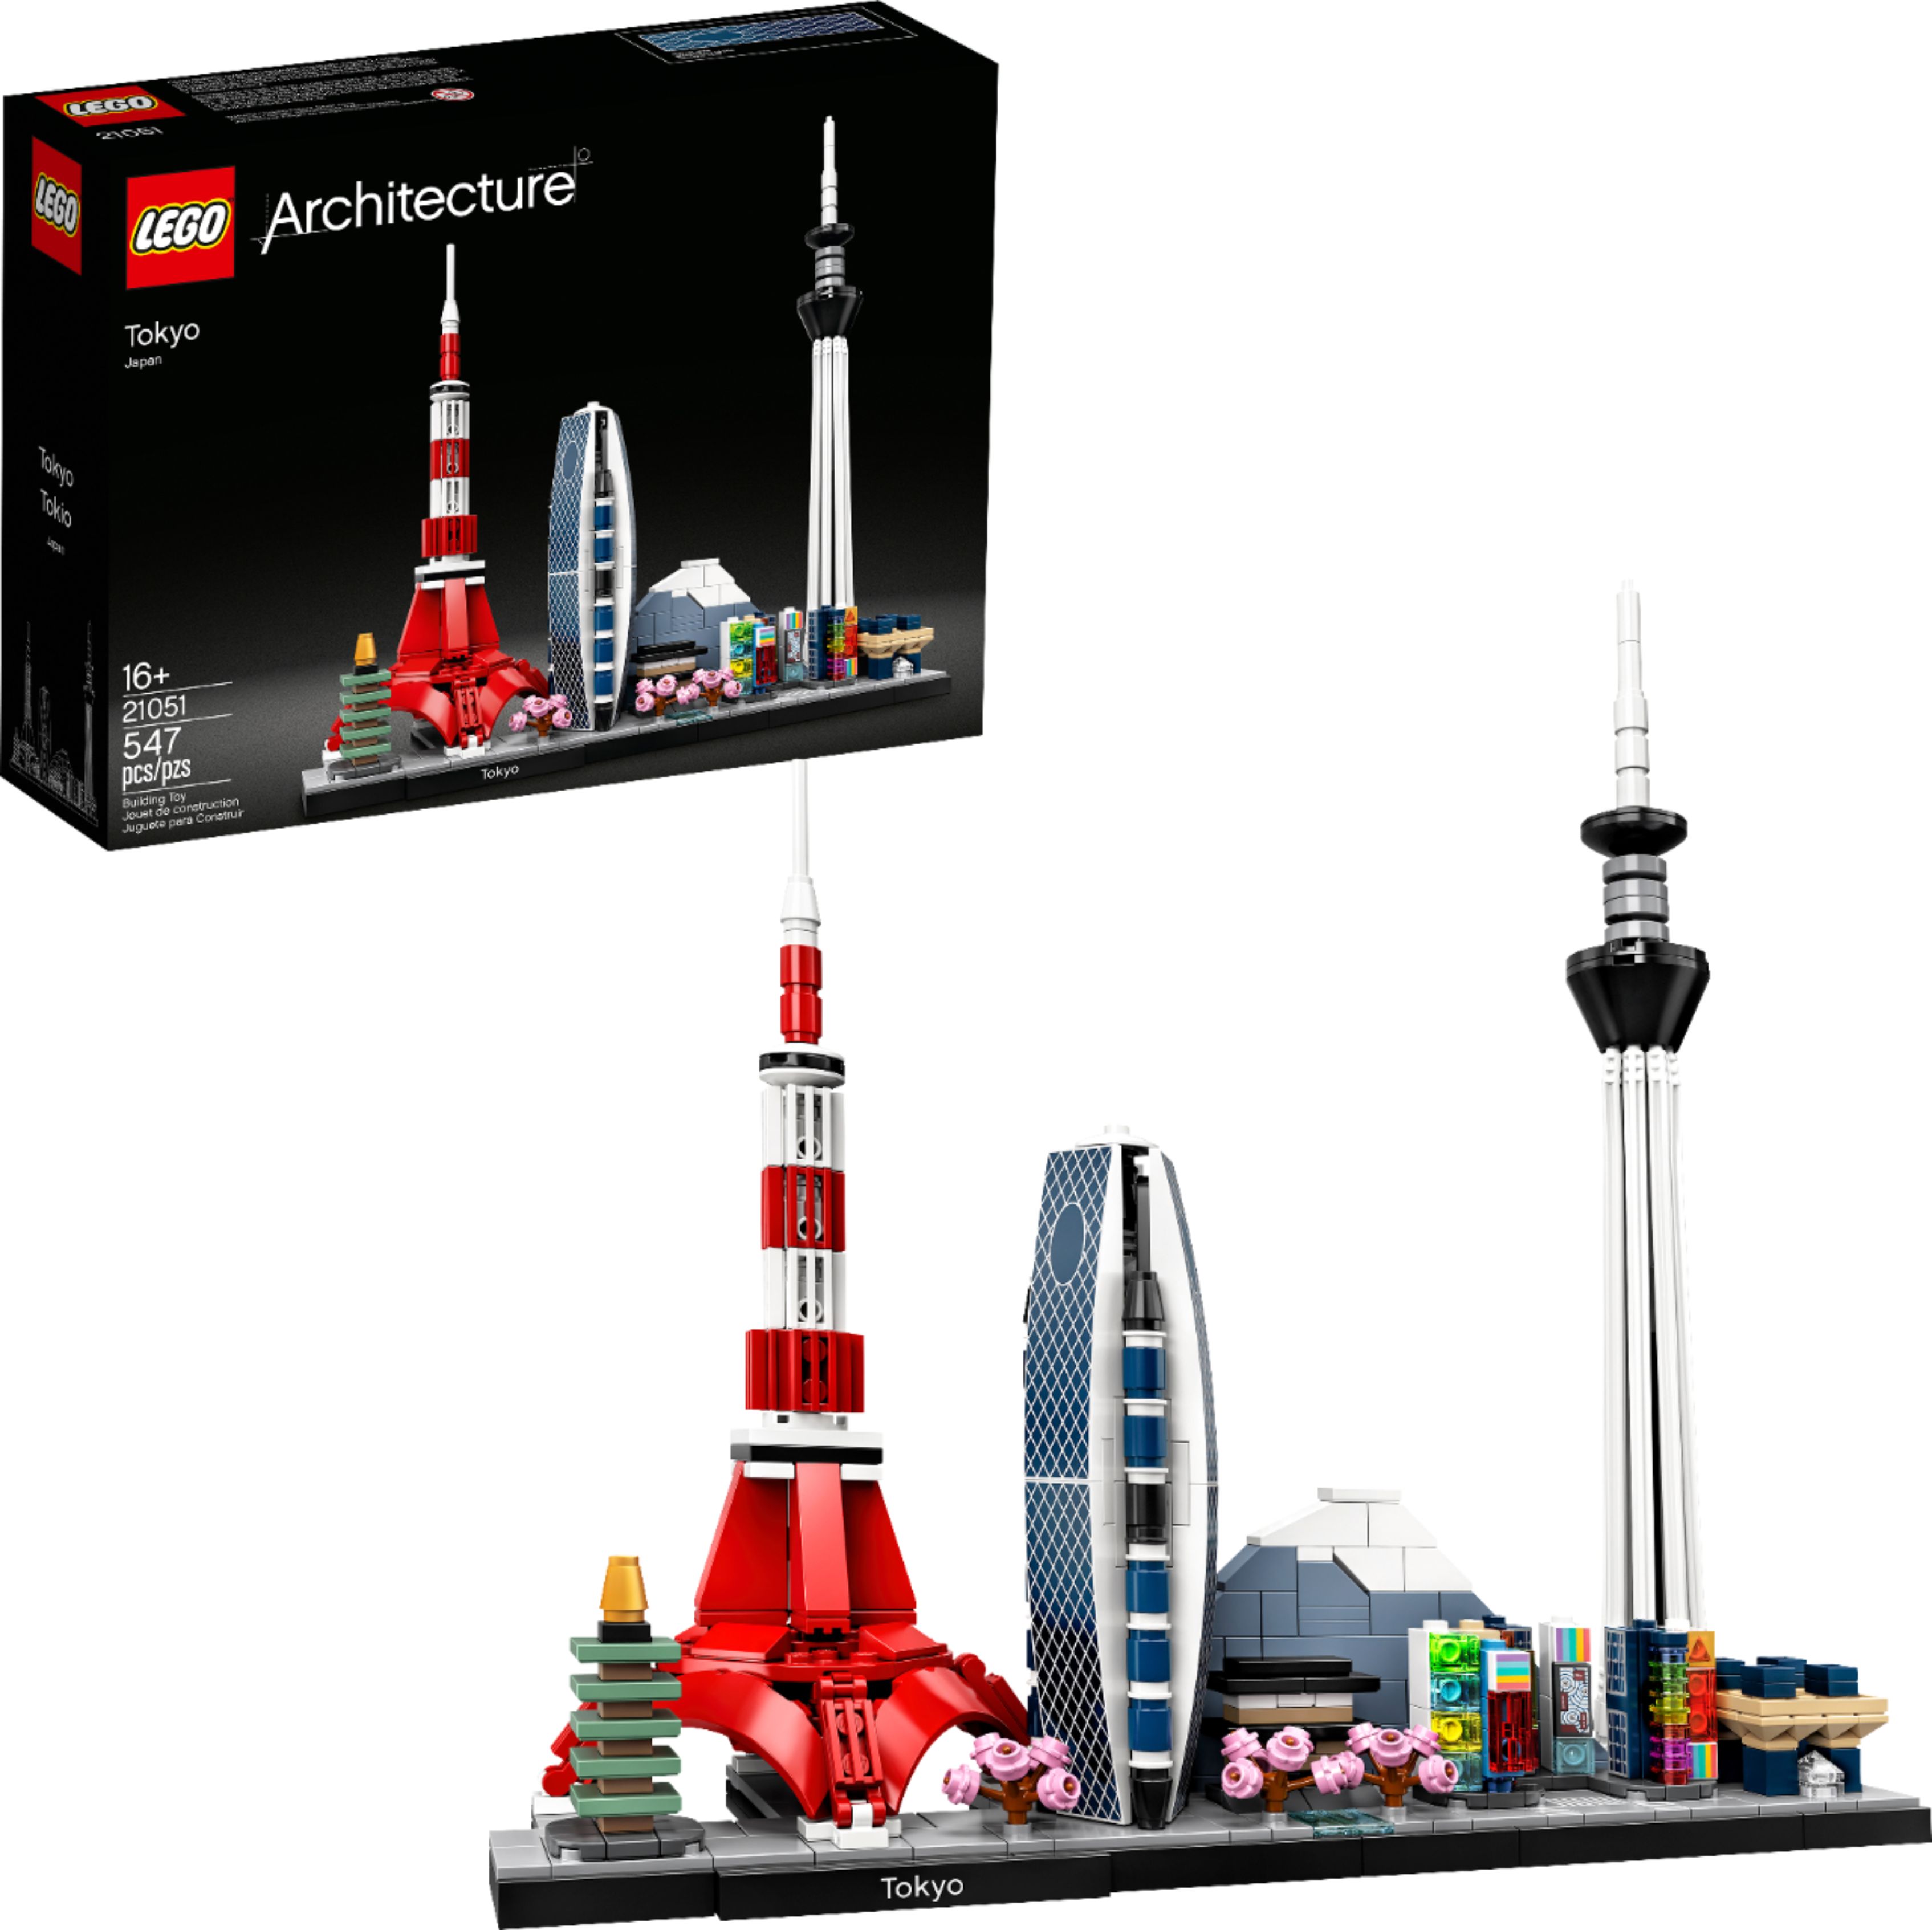 barmhjertighed pause Borgmester Best Buy: LEGO Architecture Skyline Collection Tokyo 21051 6288696